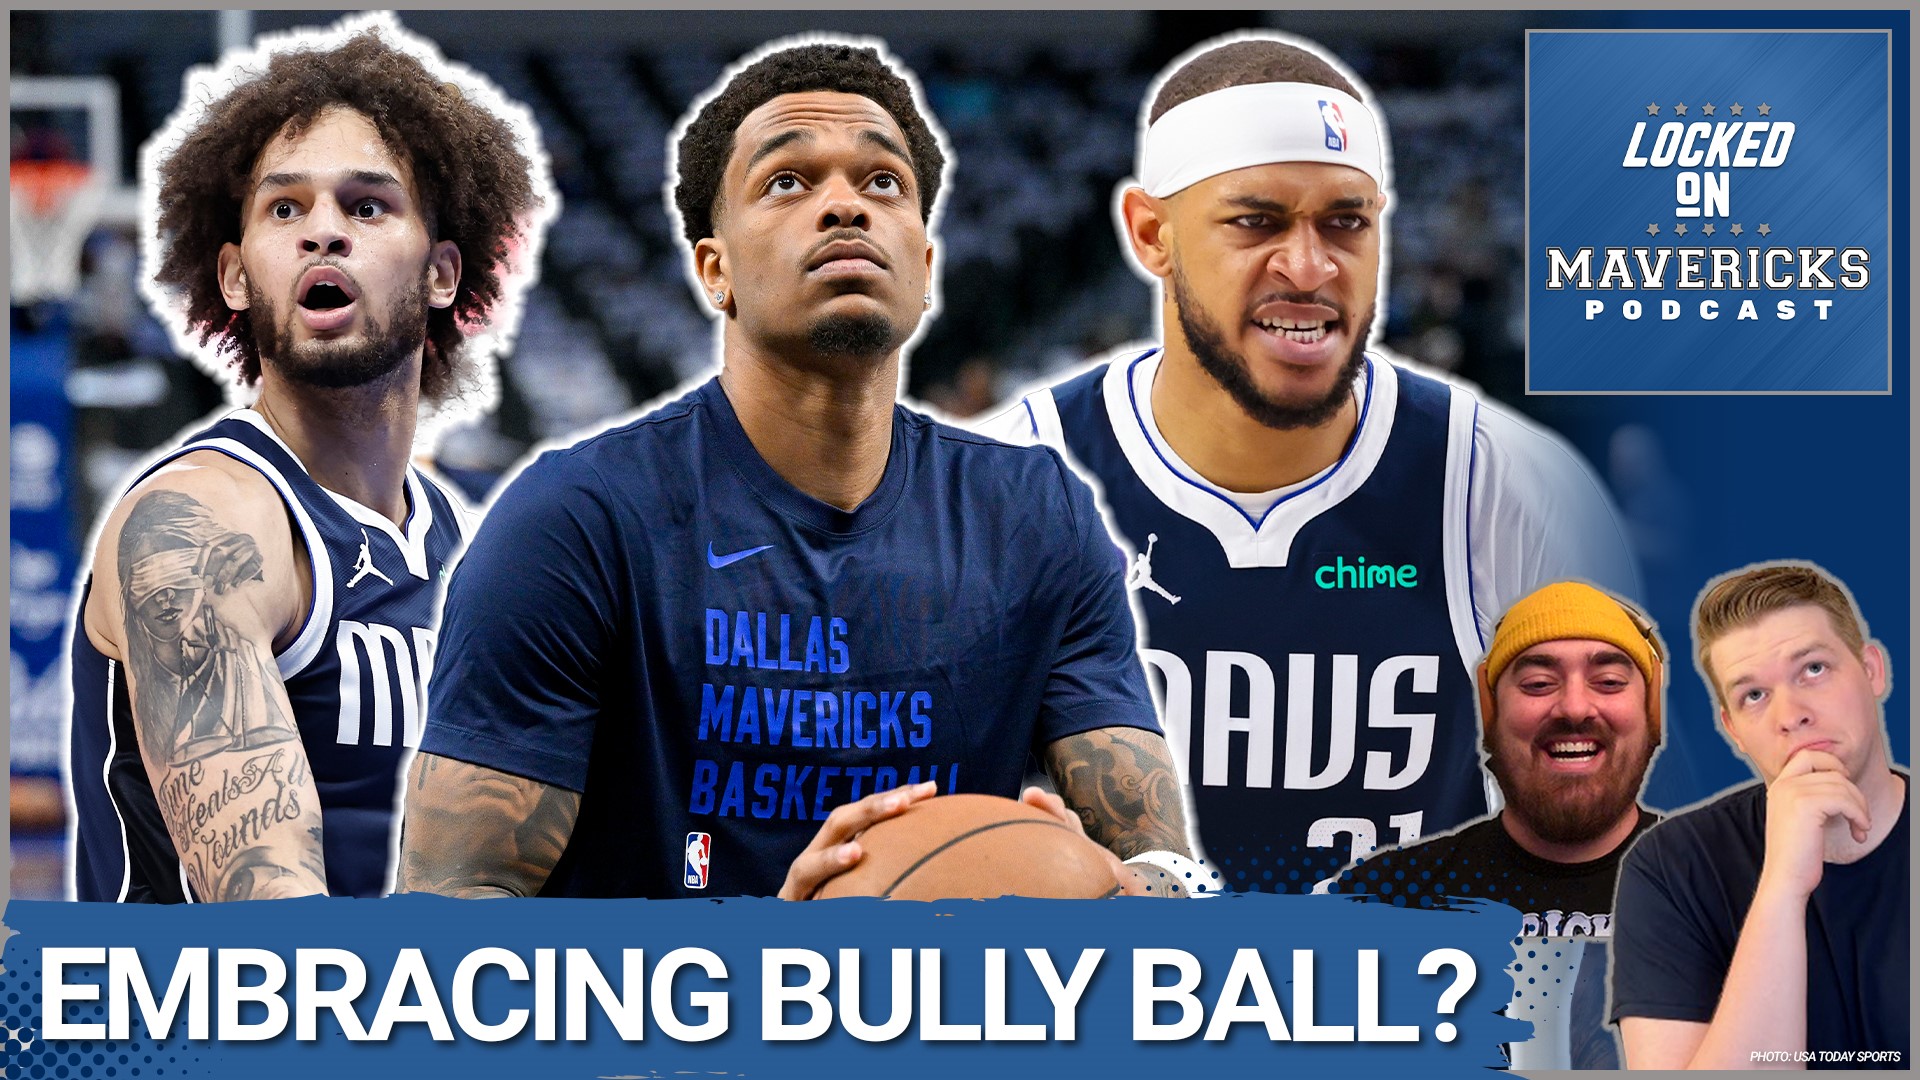 Nick Angstadt & Isaac Harris reunite to discuss the new look Dallas Mavericks, if they've embraced a new identity, if they have a 3-Point problem, and more.